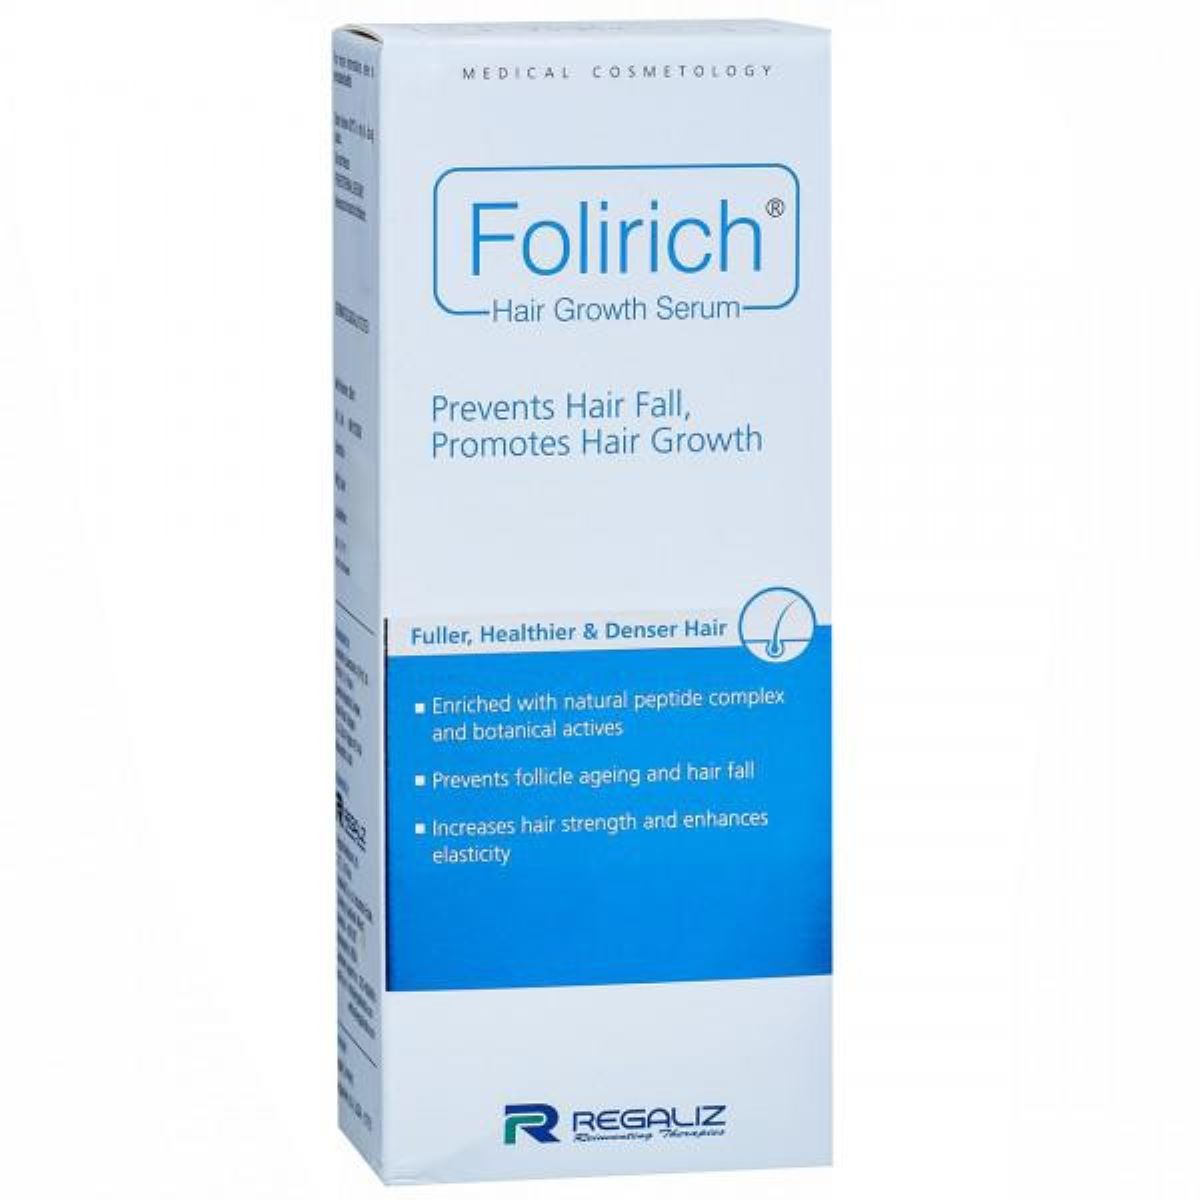 Folirich Hair Serum, 60 ml Price, Uses, Side Effects, Composition - Apollo  Pharmacy